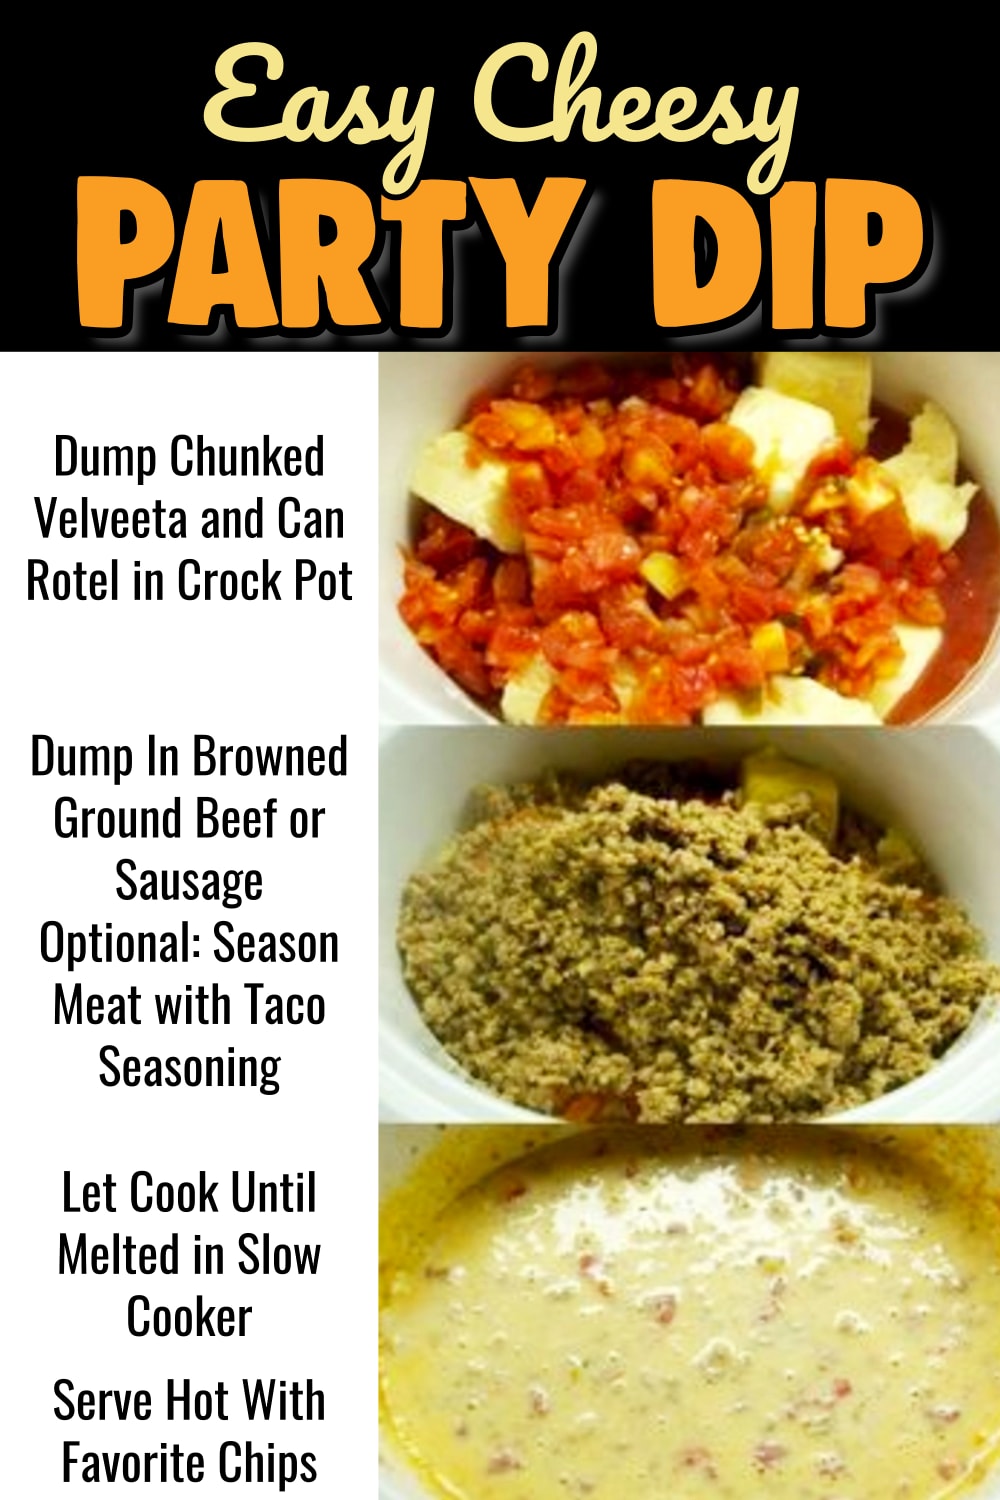 Block Party Food Ideas - Best appetizers to bring to a neighborhood block party and simple make ahead party food for a crowd. My recipe for an EASY party dip with Velveeta cheese, ground beef or ground sausage and canned Rotel cooked in my crock pot slow cooker - definite crowd-pleaser